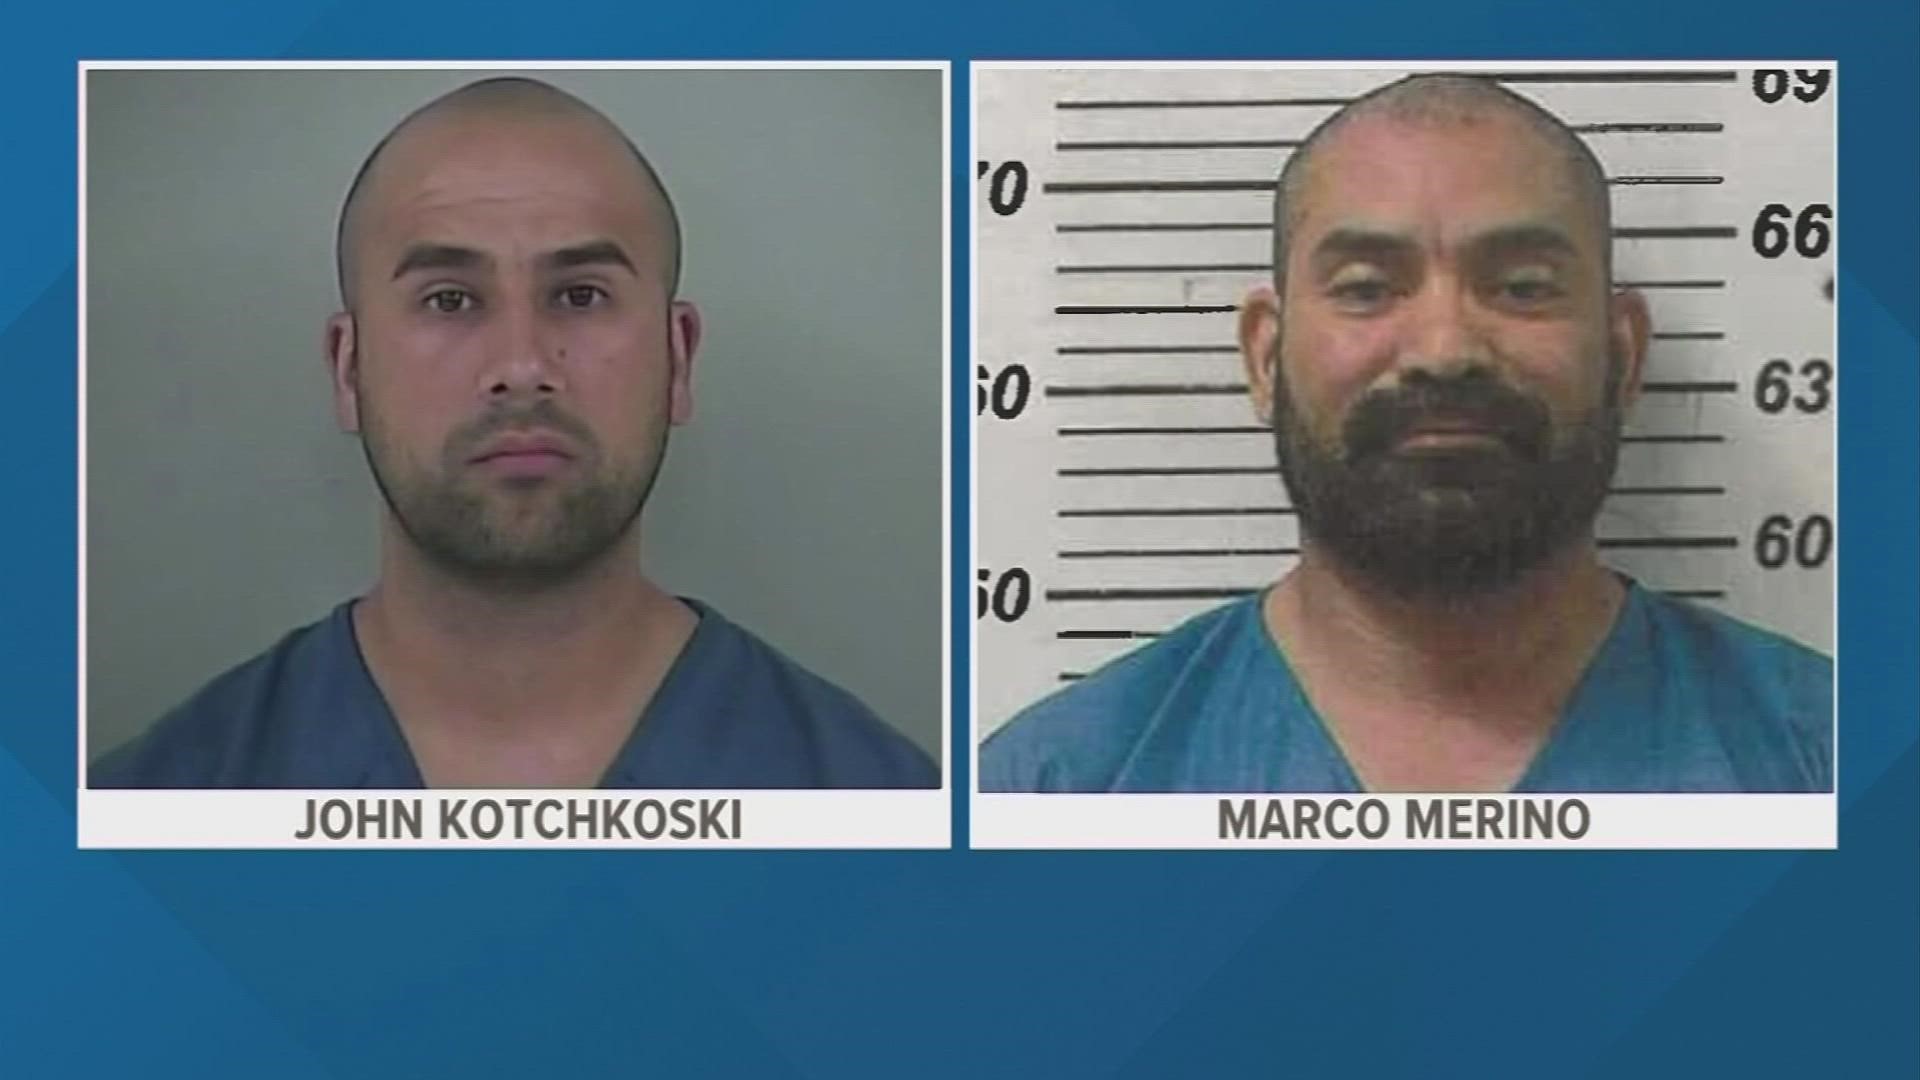 John Kotchkoski and Marco Merino are facing federal charges for allegedly dealing fentanyl.